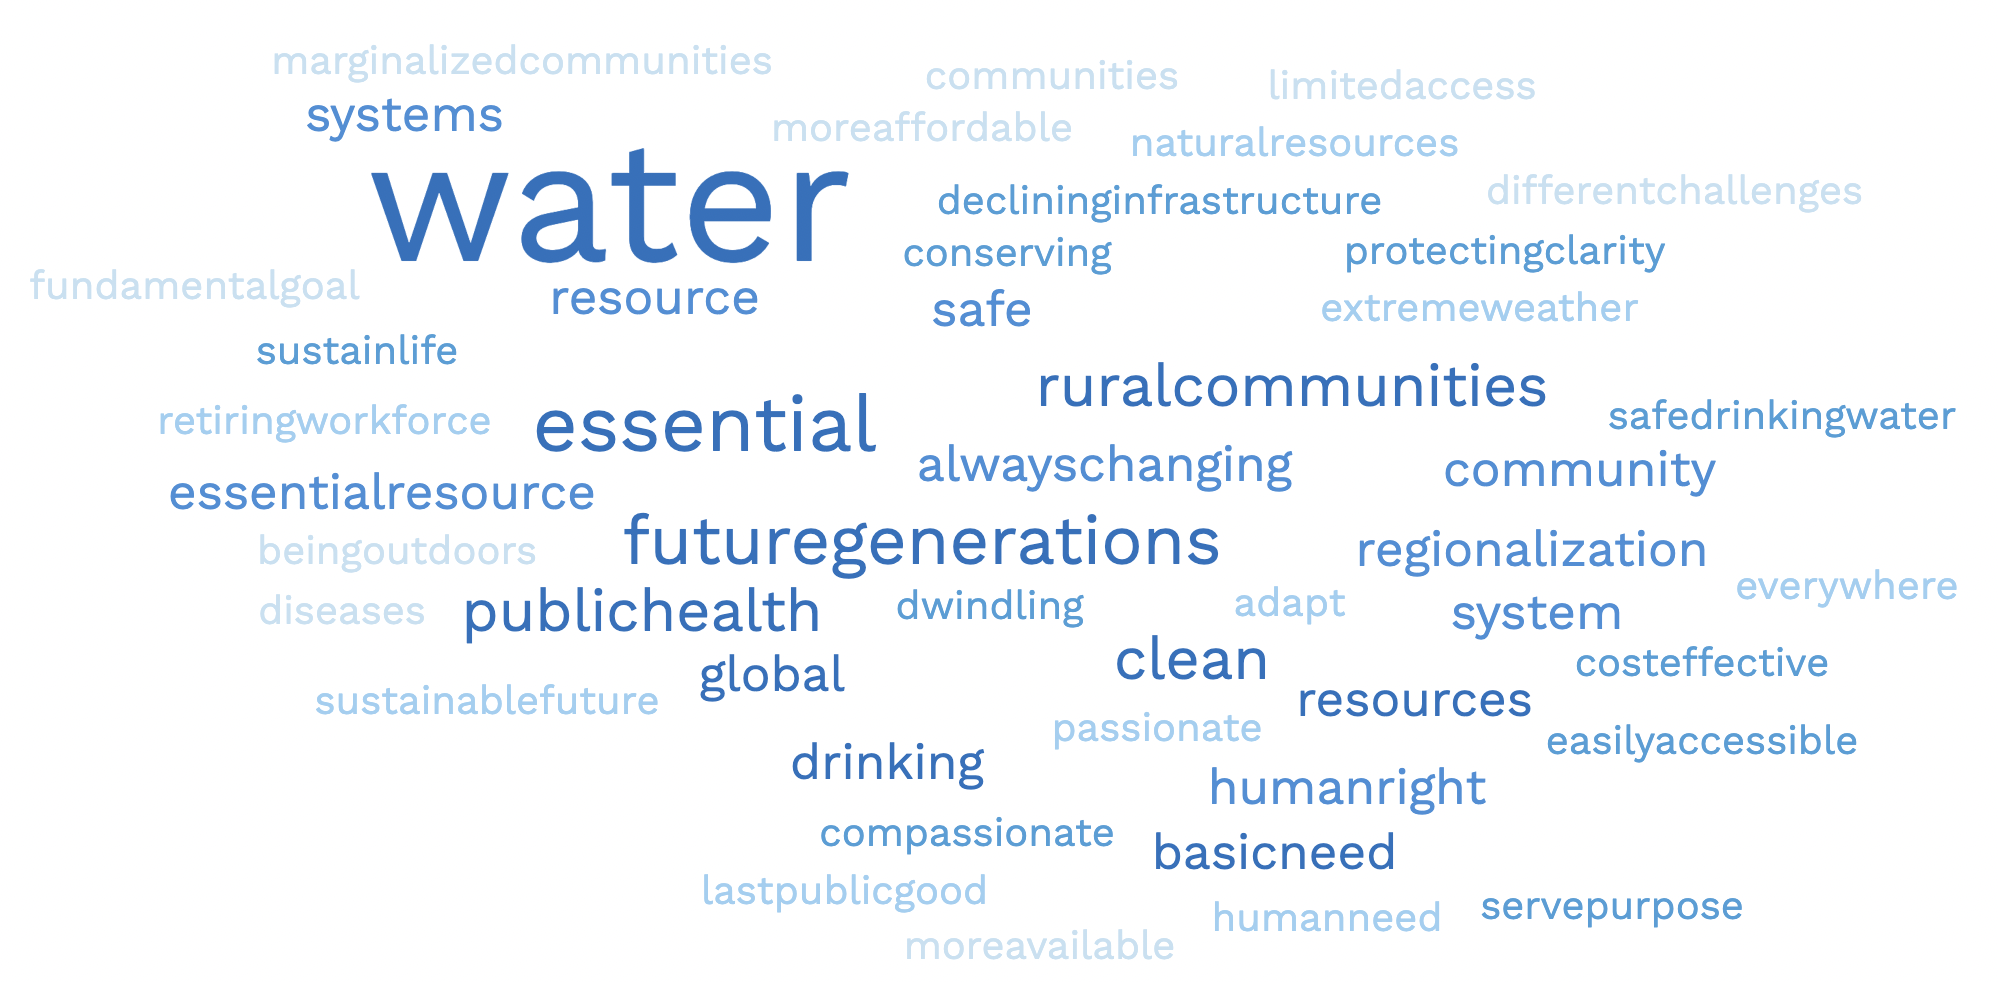 Image of various words associated with leadership in the water sector.  Words include marginalized communities, water, rural communities, resources, public health, human right, retiring workforce, and many more.